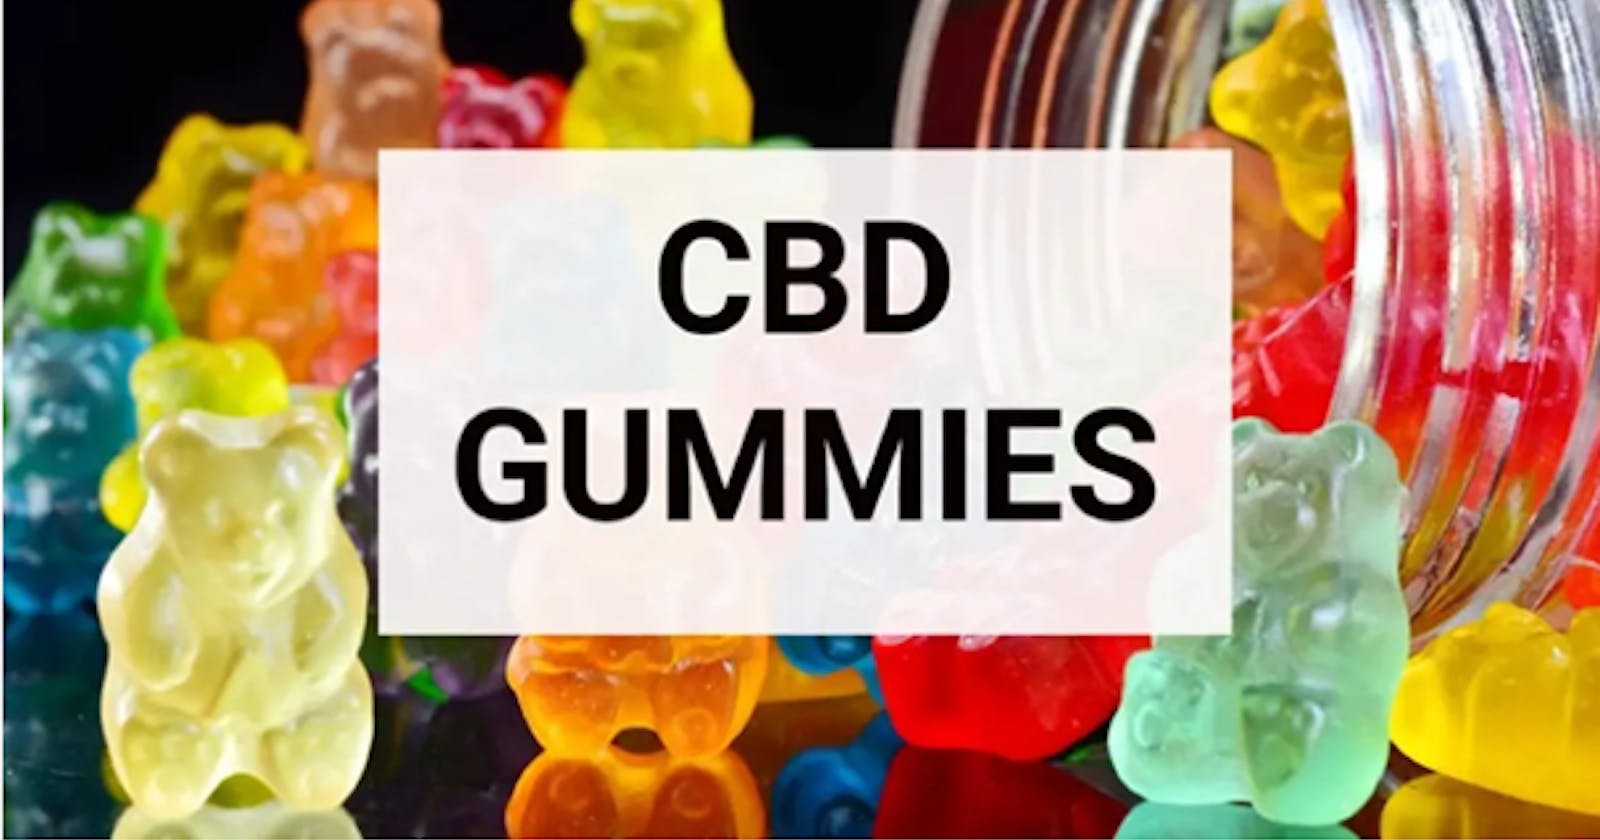 Regen CBD Gummies Reviews SHOCKING Report Know The Side Effects And Ingredients Used In CBD Gummies Trustworthy Brand or Cheap CBD Gummy?